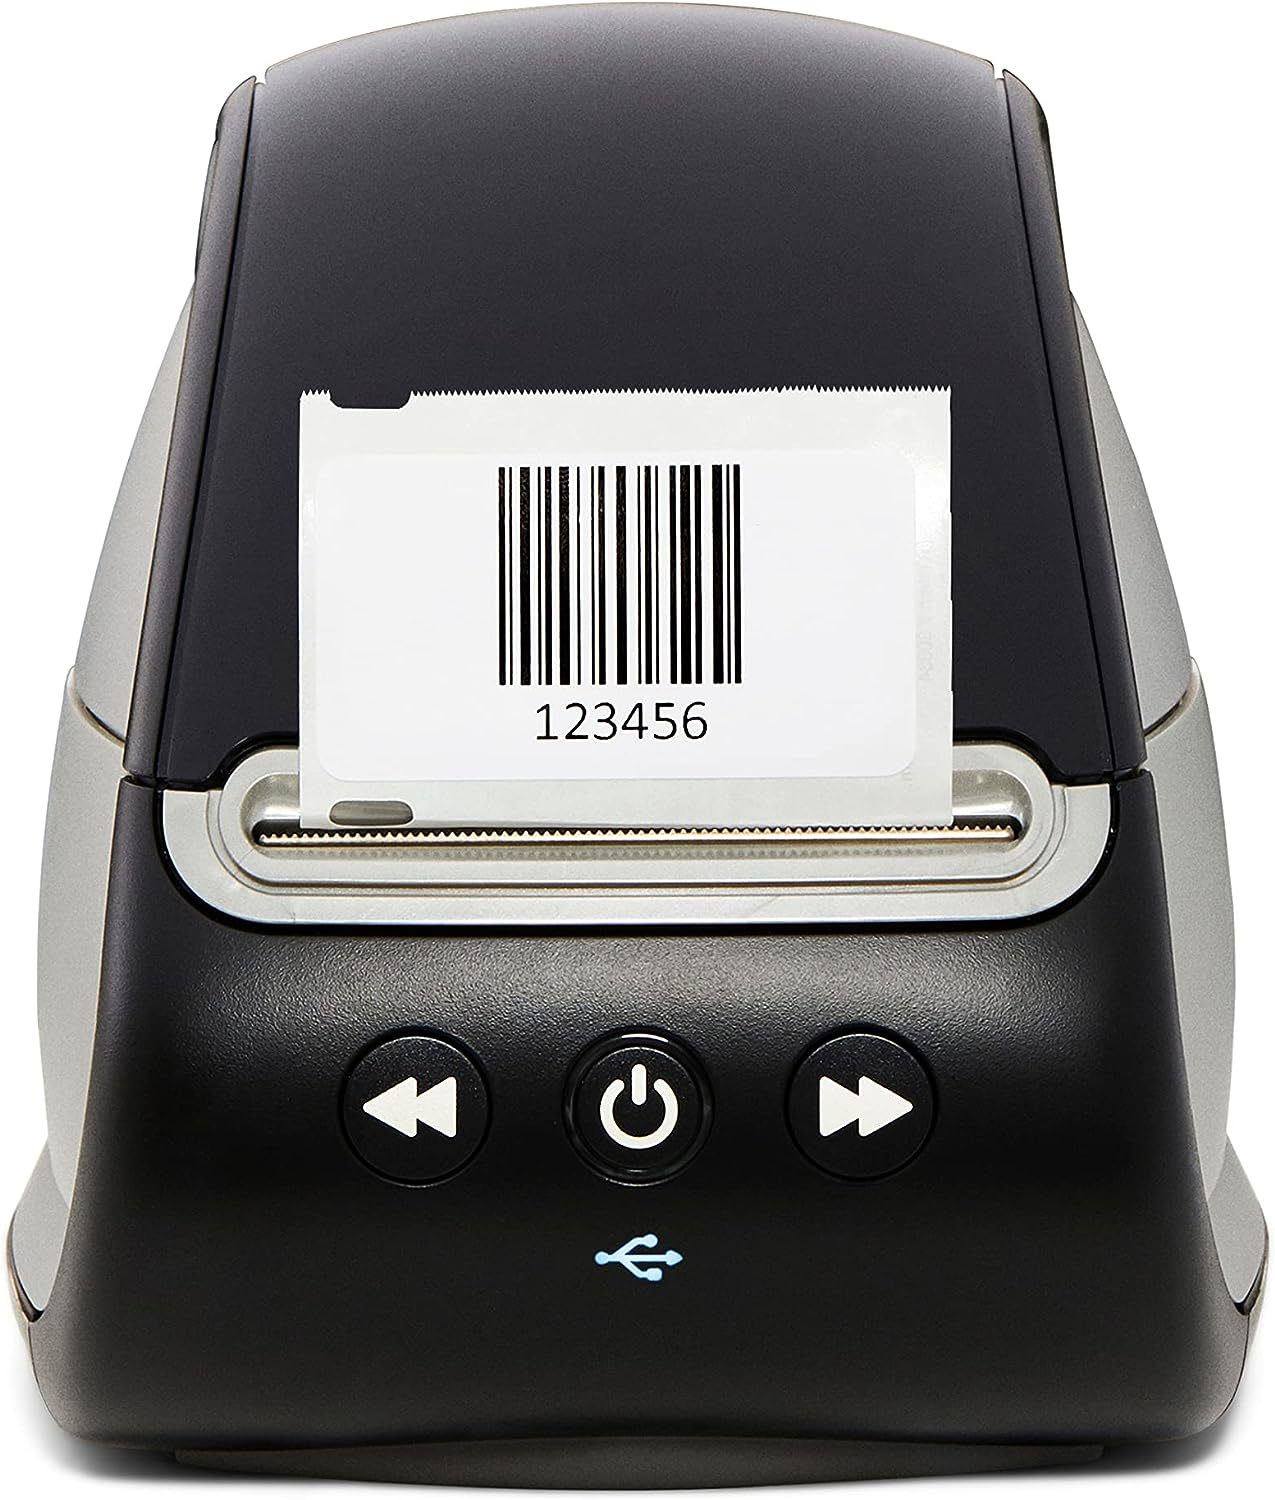 Label Printer, Model Number 550, From Dymo. - $147.95